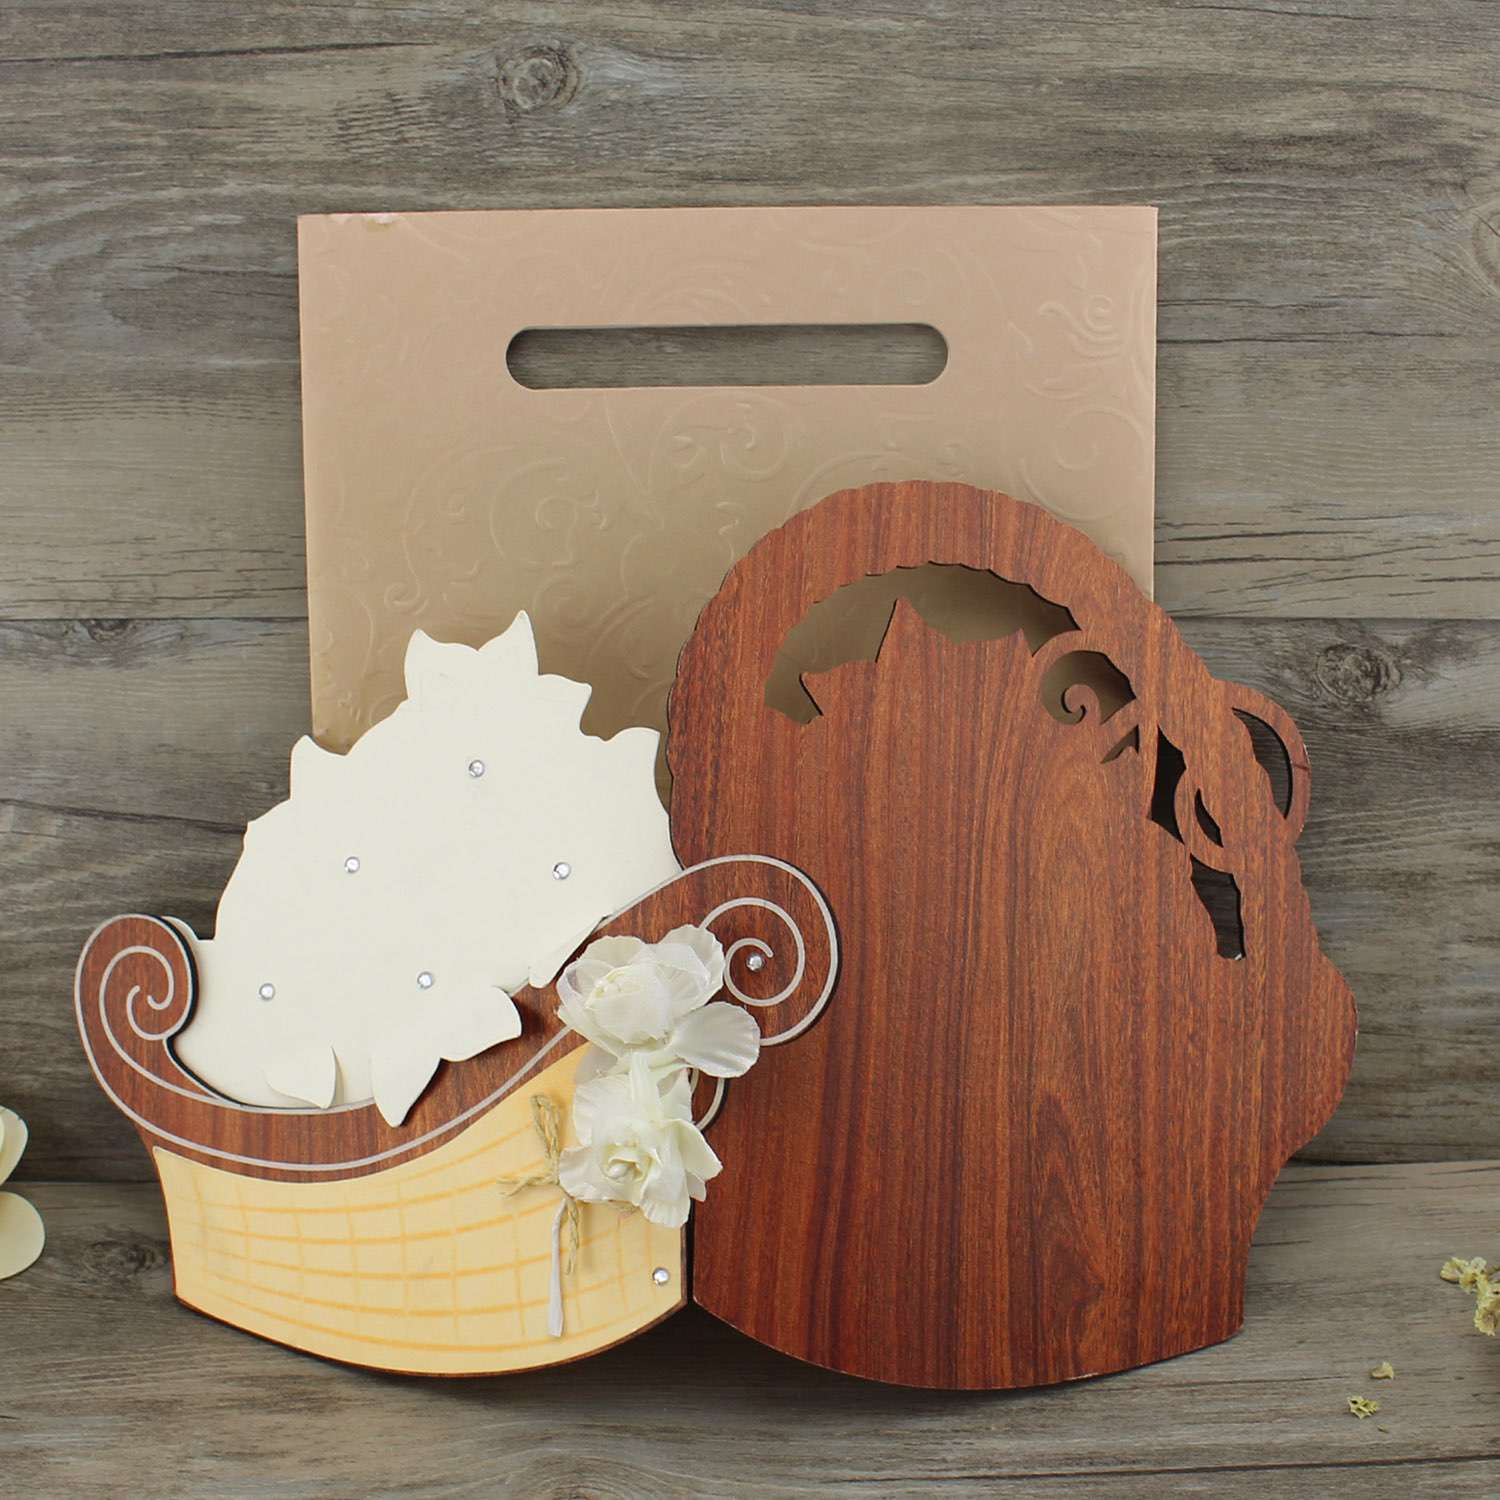 Wooden  Invitation Card With Hand Bag Wedding Invitation Card Customized